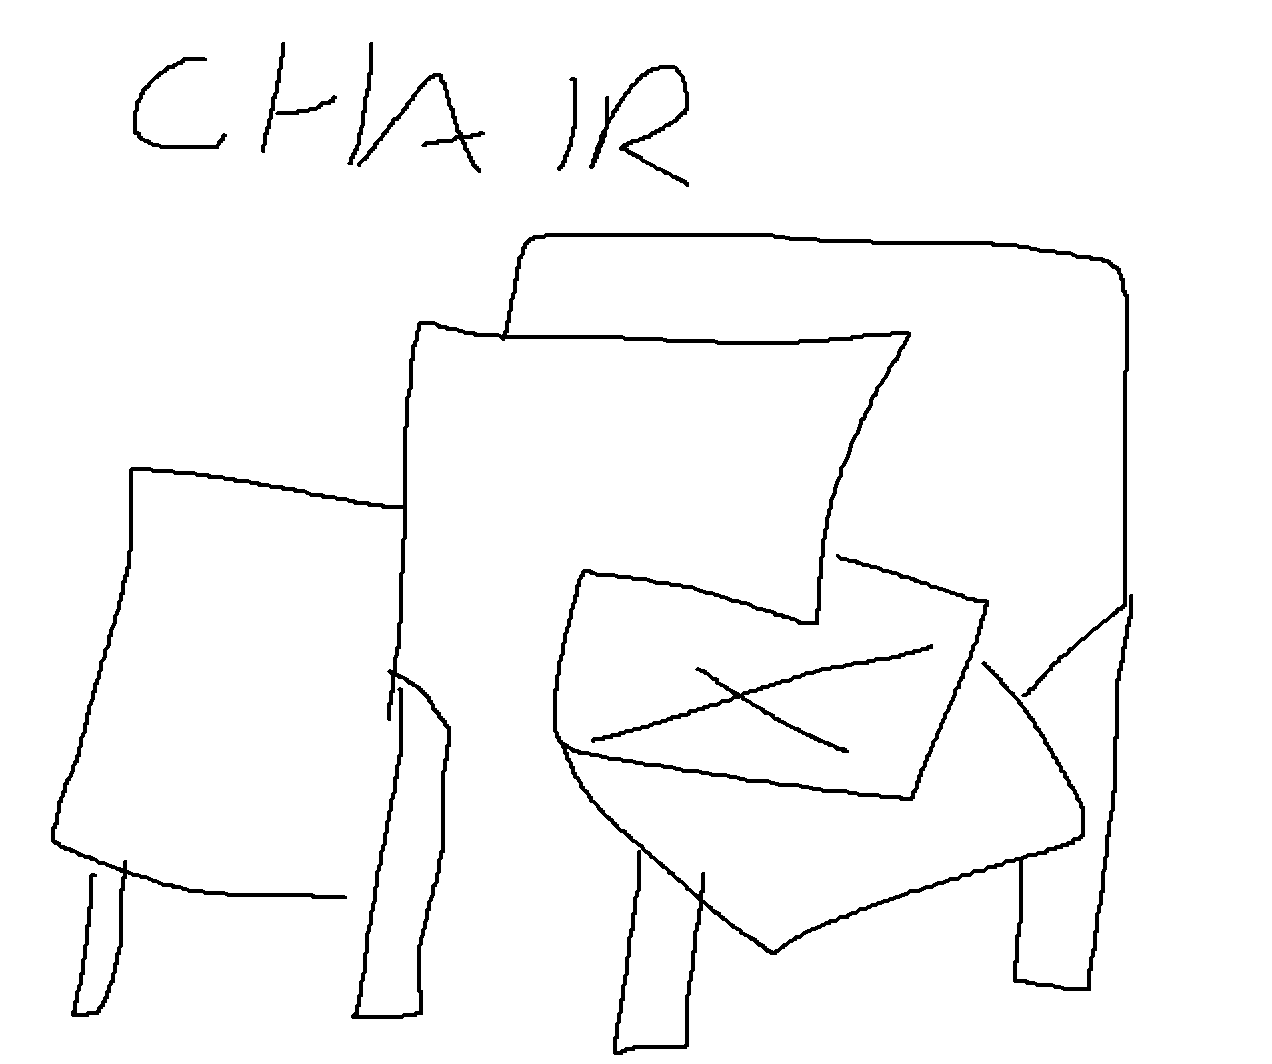 /img/mspaint/chair.png